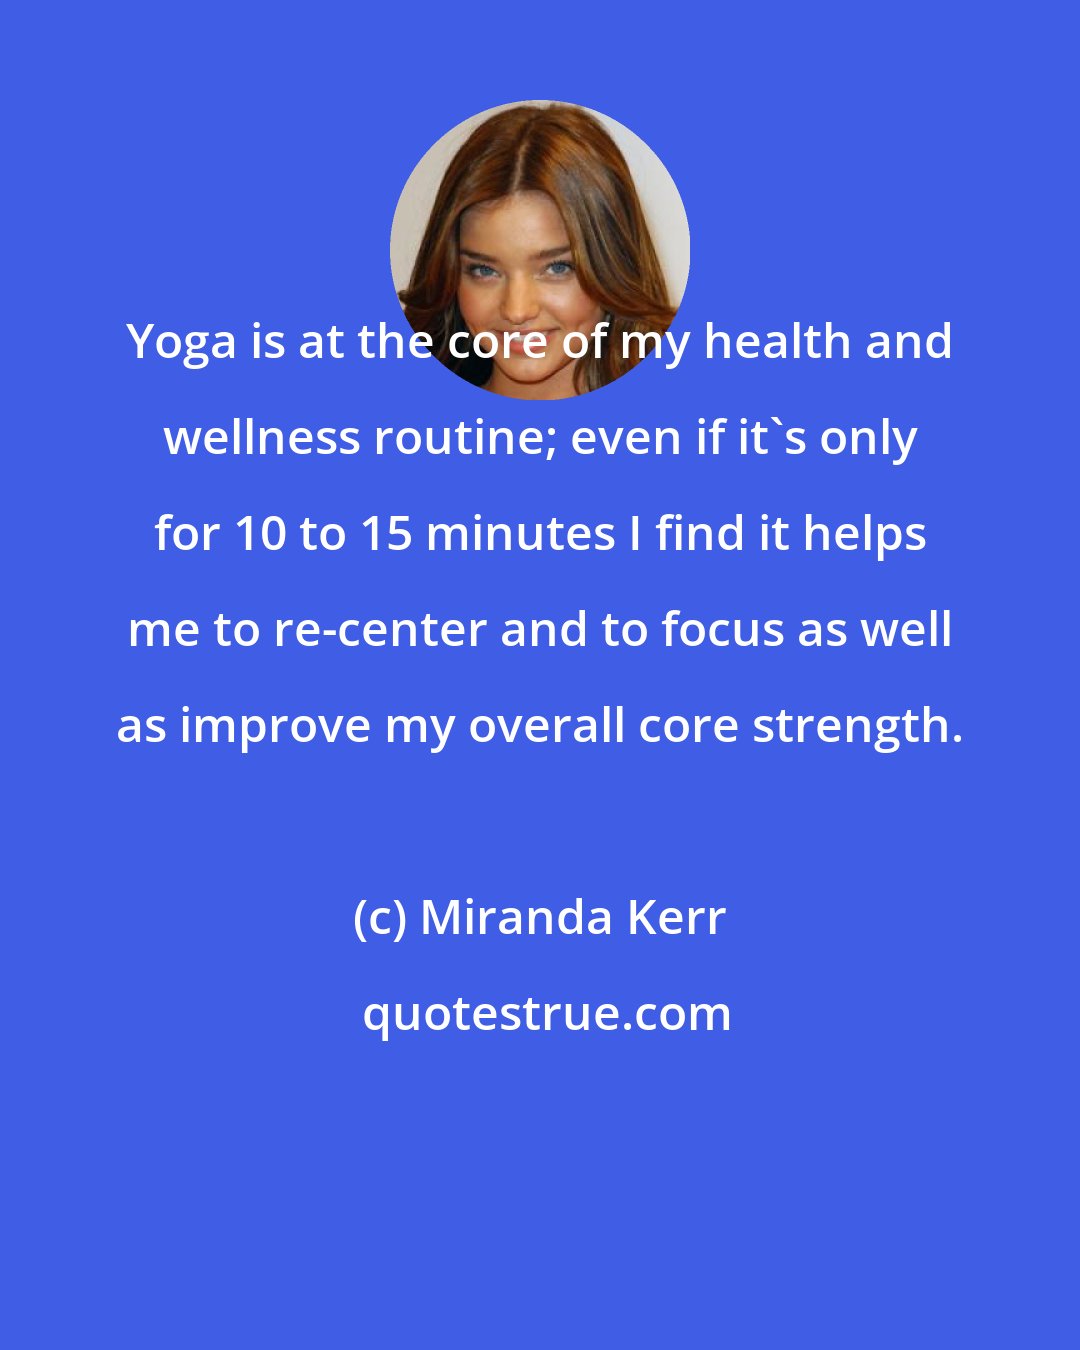 Miranda Kerr: Yoga is at the core of my health and wellness routine; even if it's only for 10 to 15 minutes I find it helps me to re-center and to focus as well as improve my overall core strength.